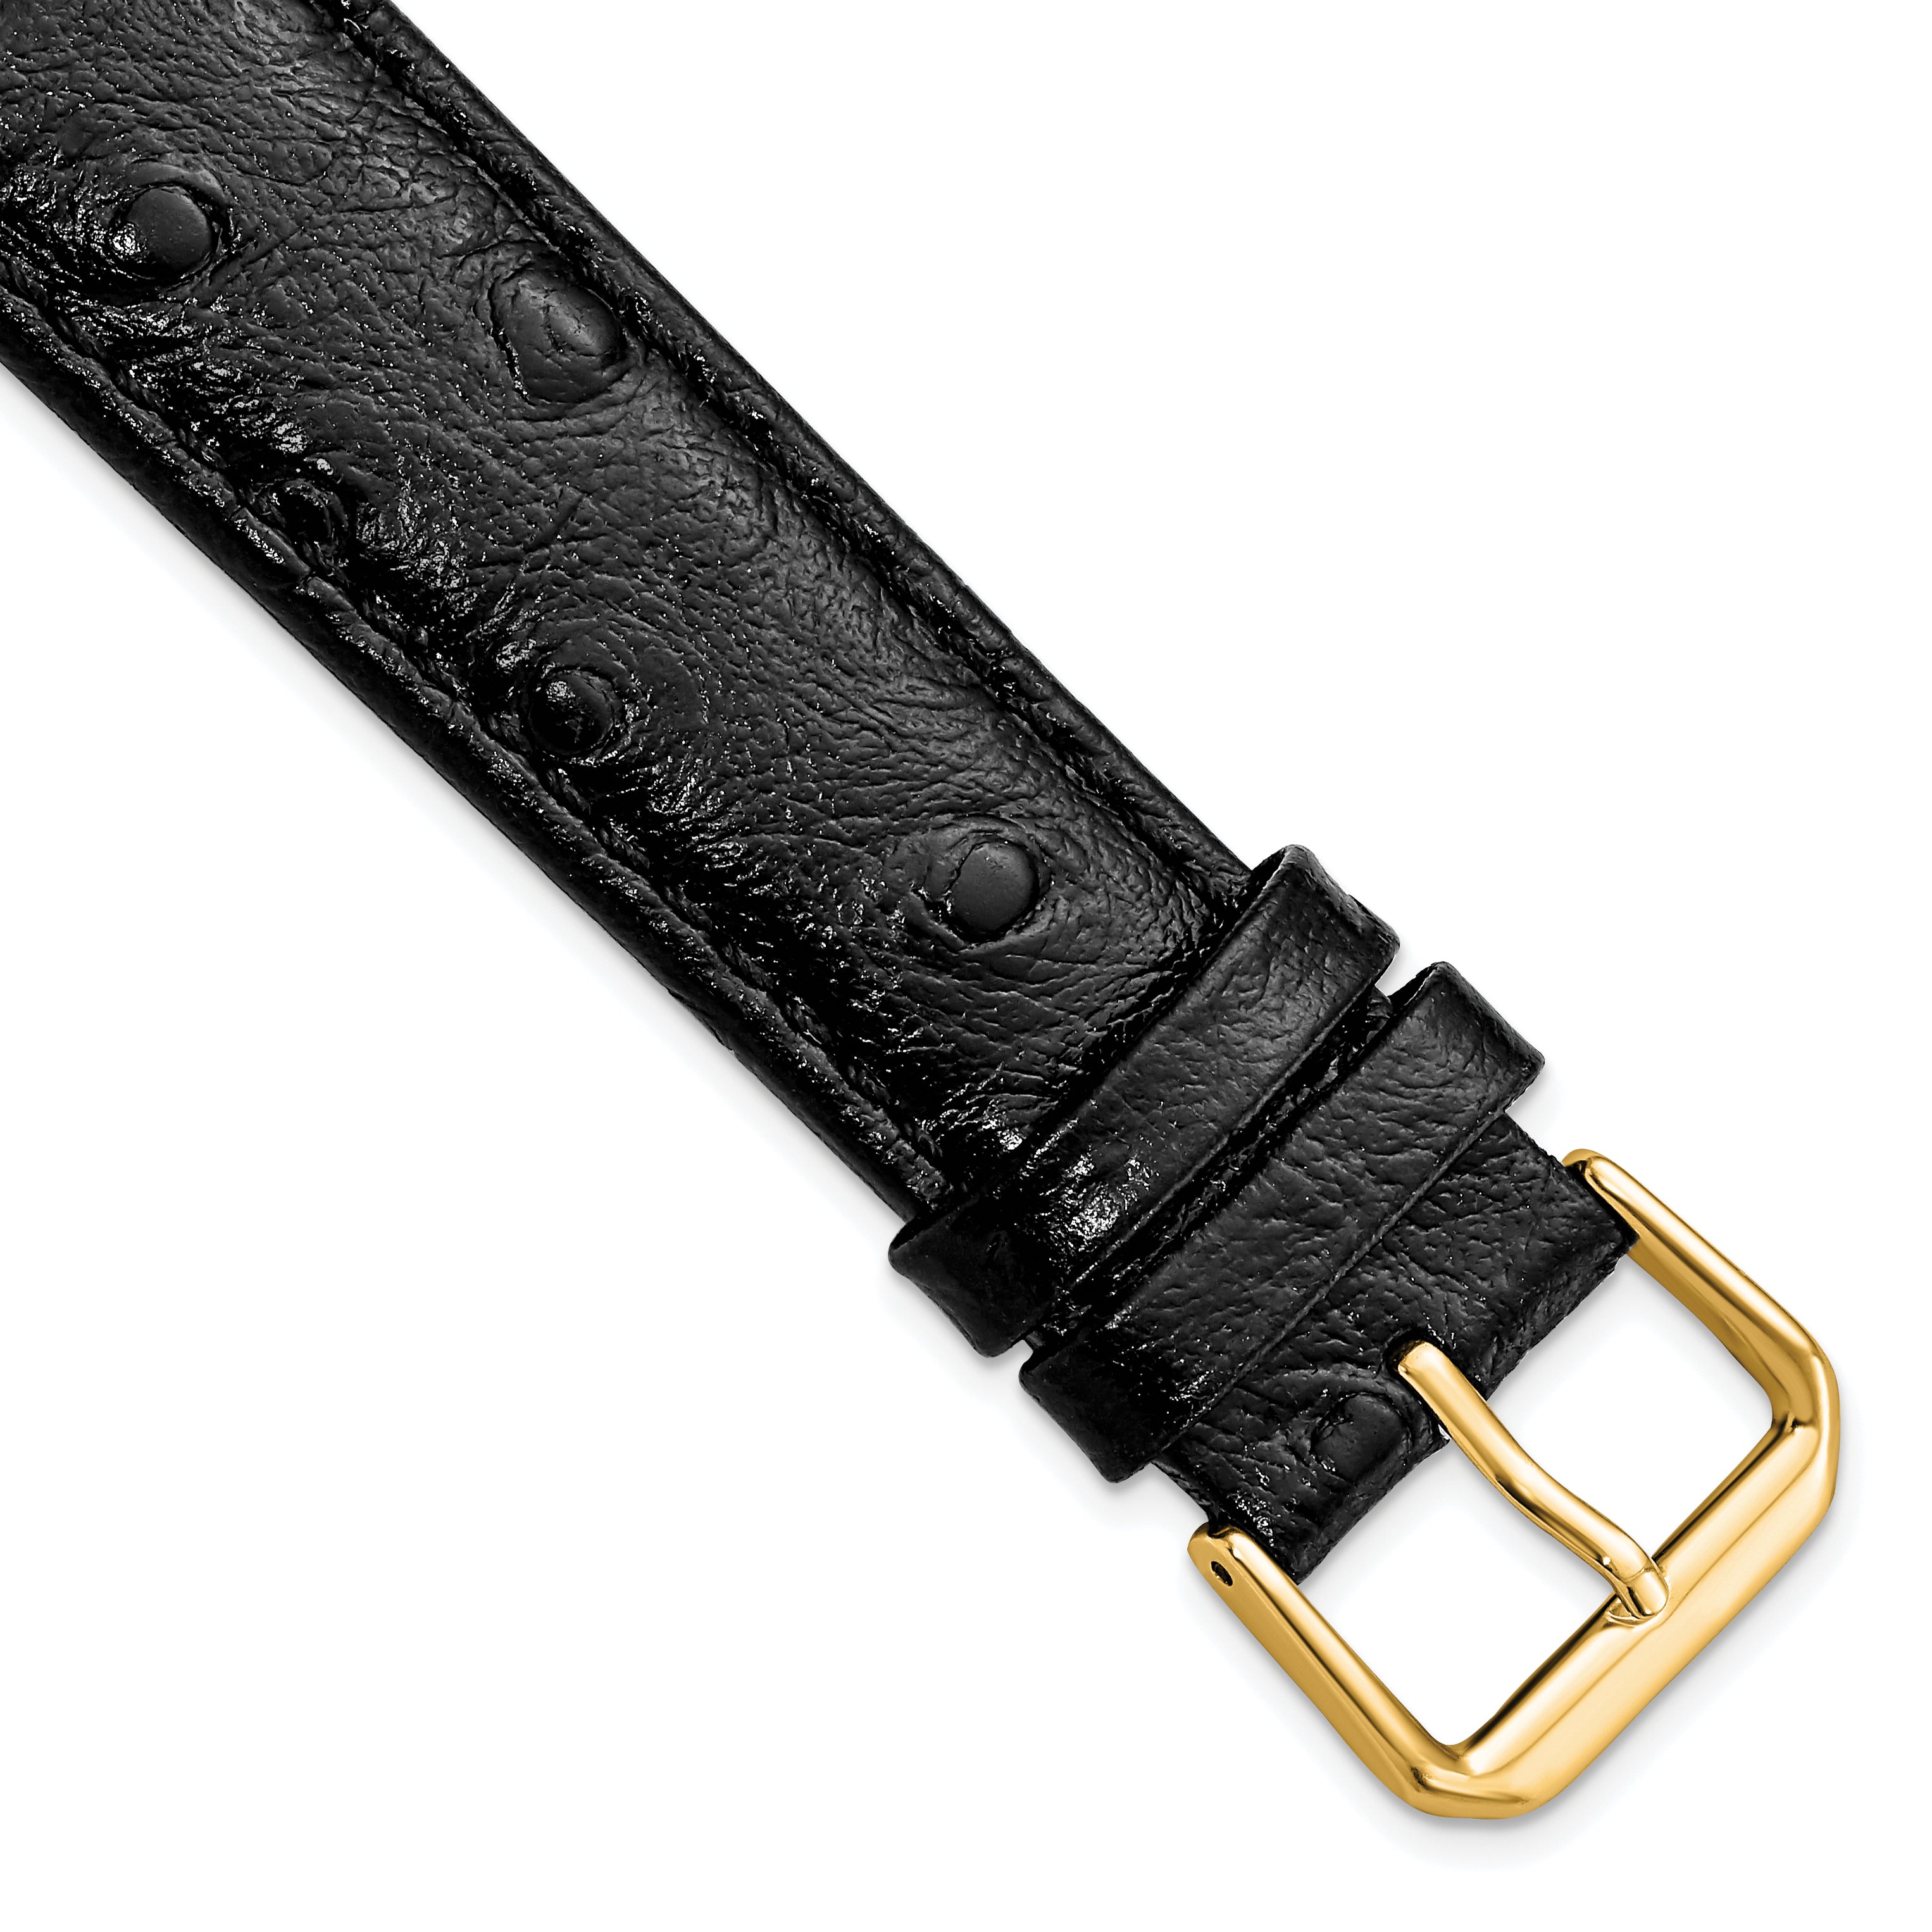 DeBeer 20mm Black Ostrich Grain Leather with Gold-tone Buckle 7.5 inch Watch Band